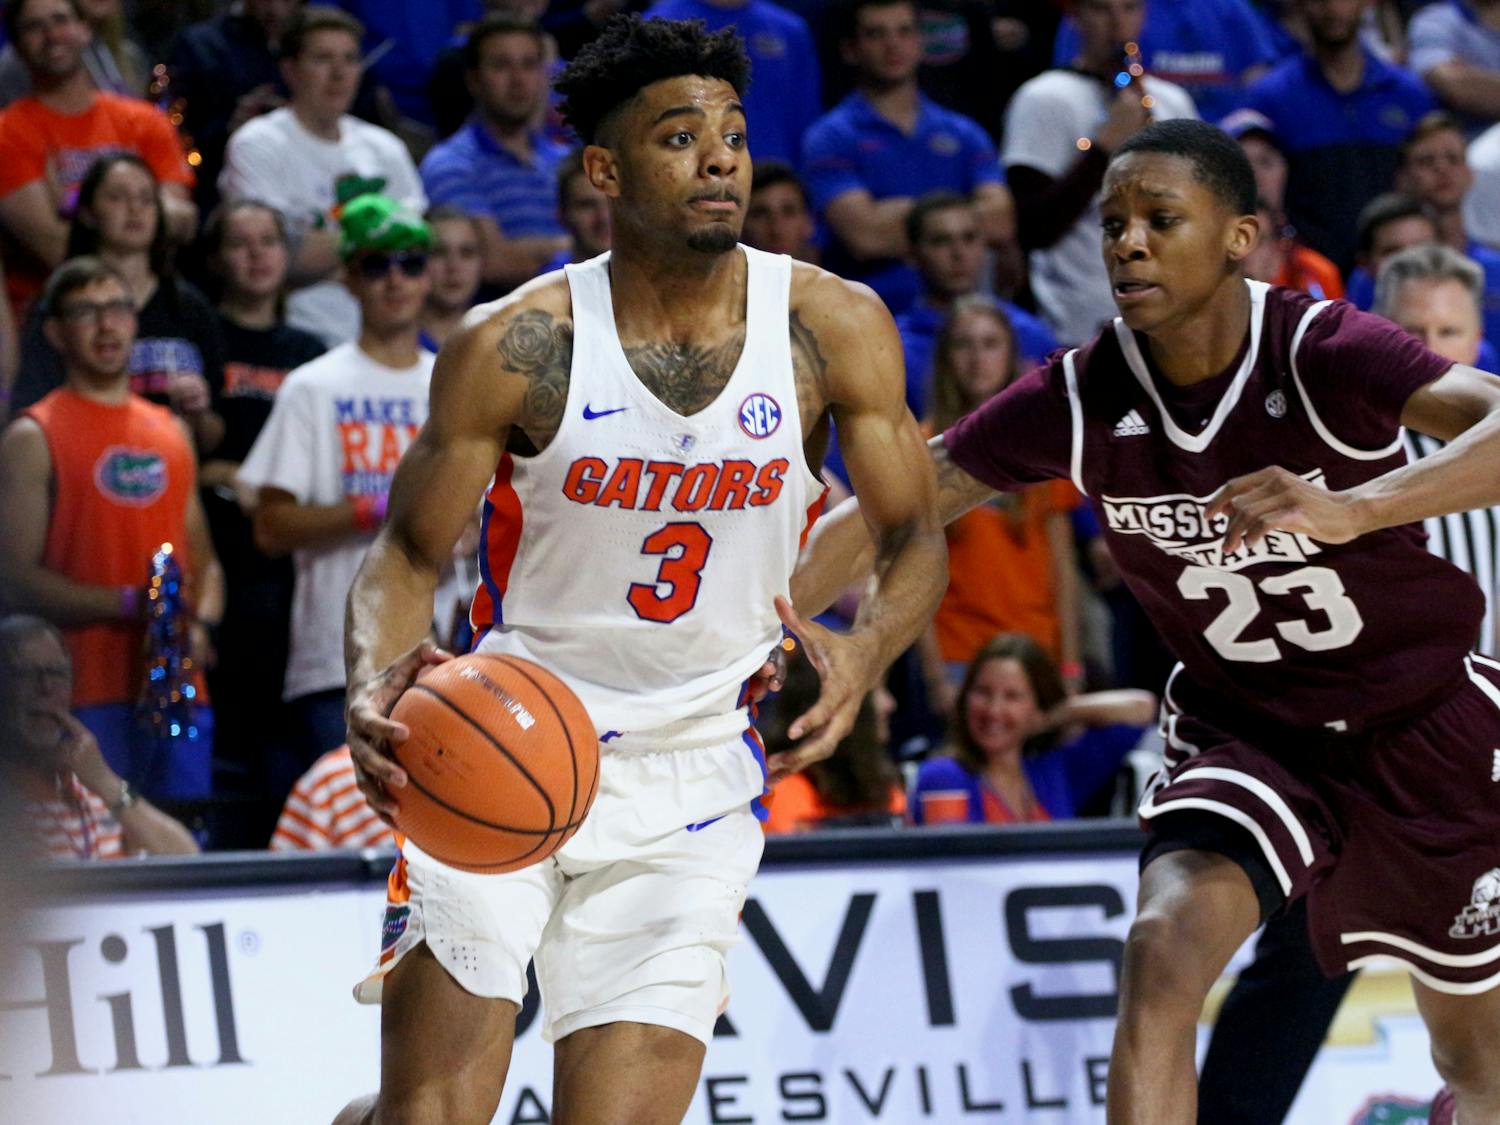 As a junior-transfer in his first year at UF, guard Jalen Hudson (left) led the Gators in scoring with 15.5 points per game. He was named SEC Player of the Week three times in 2017-18.